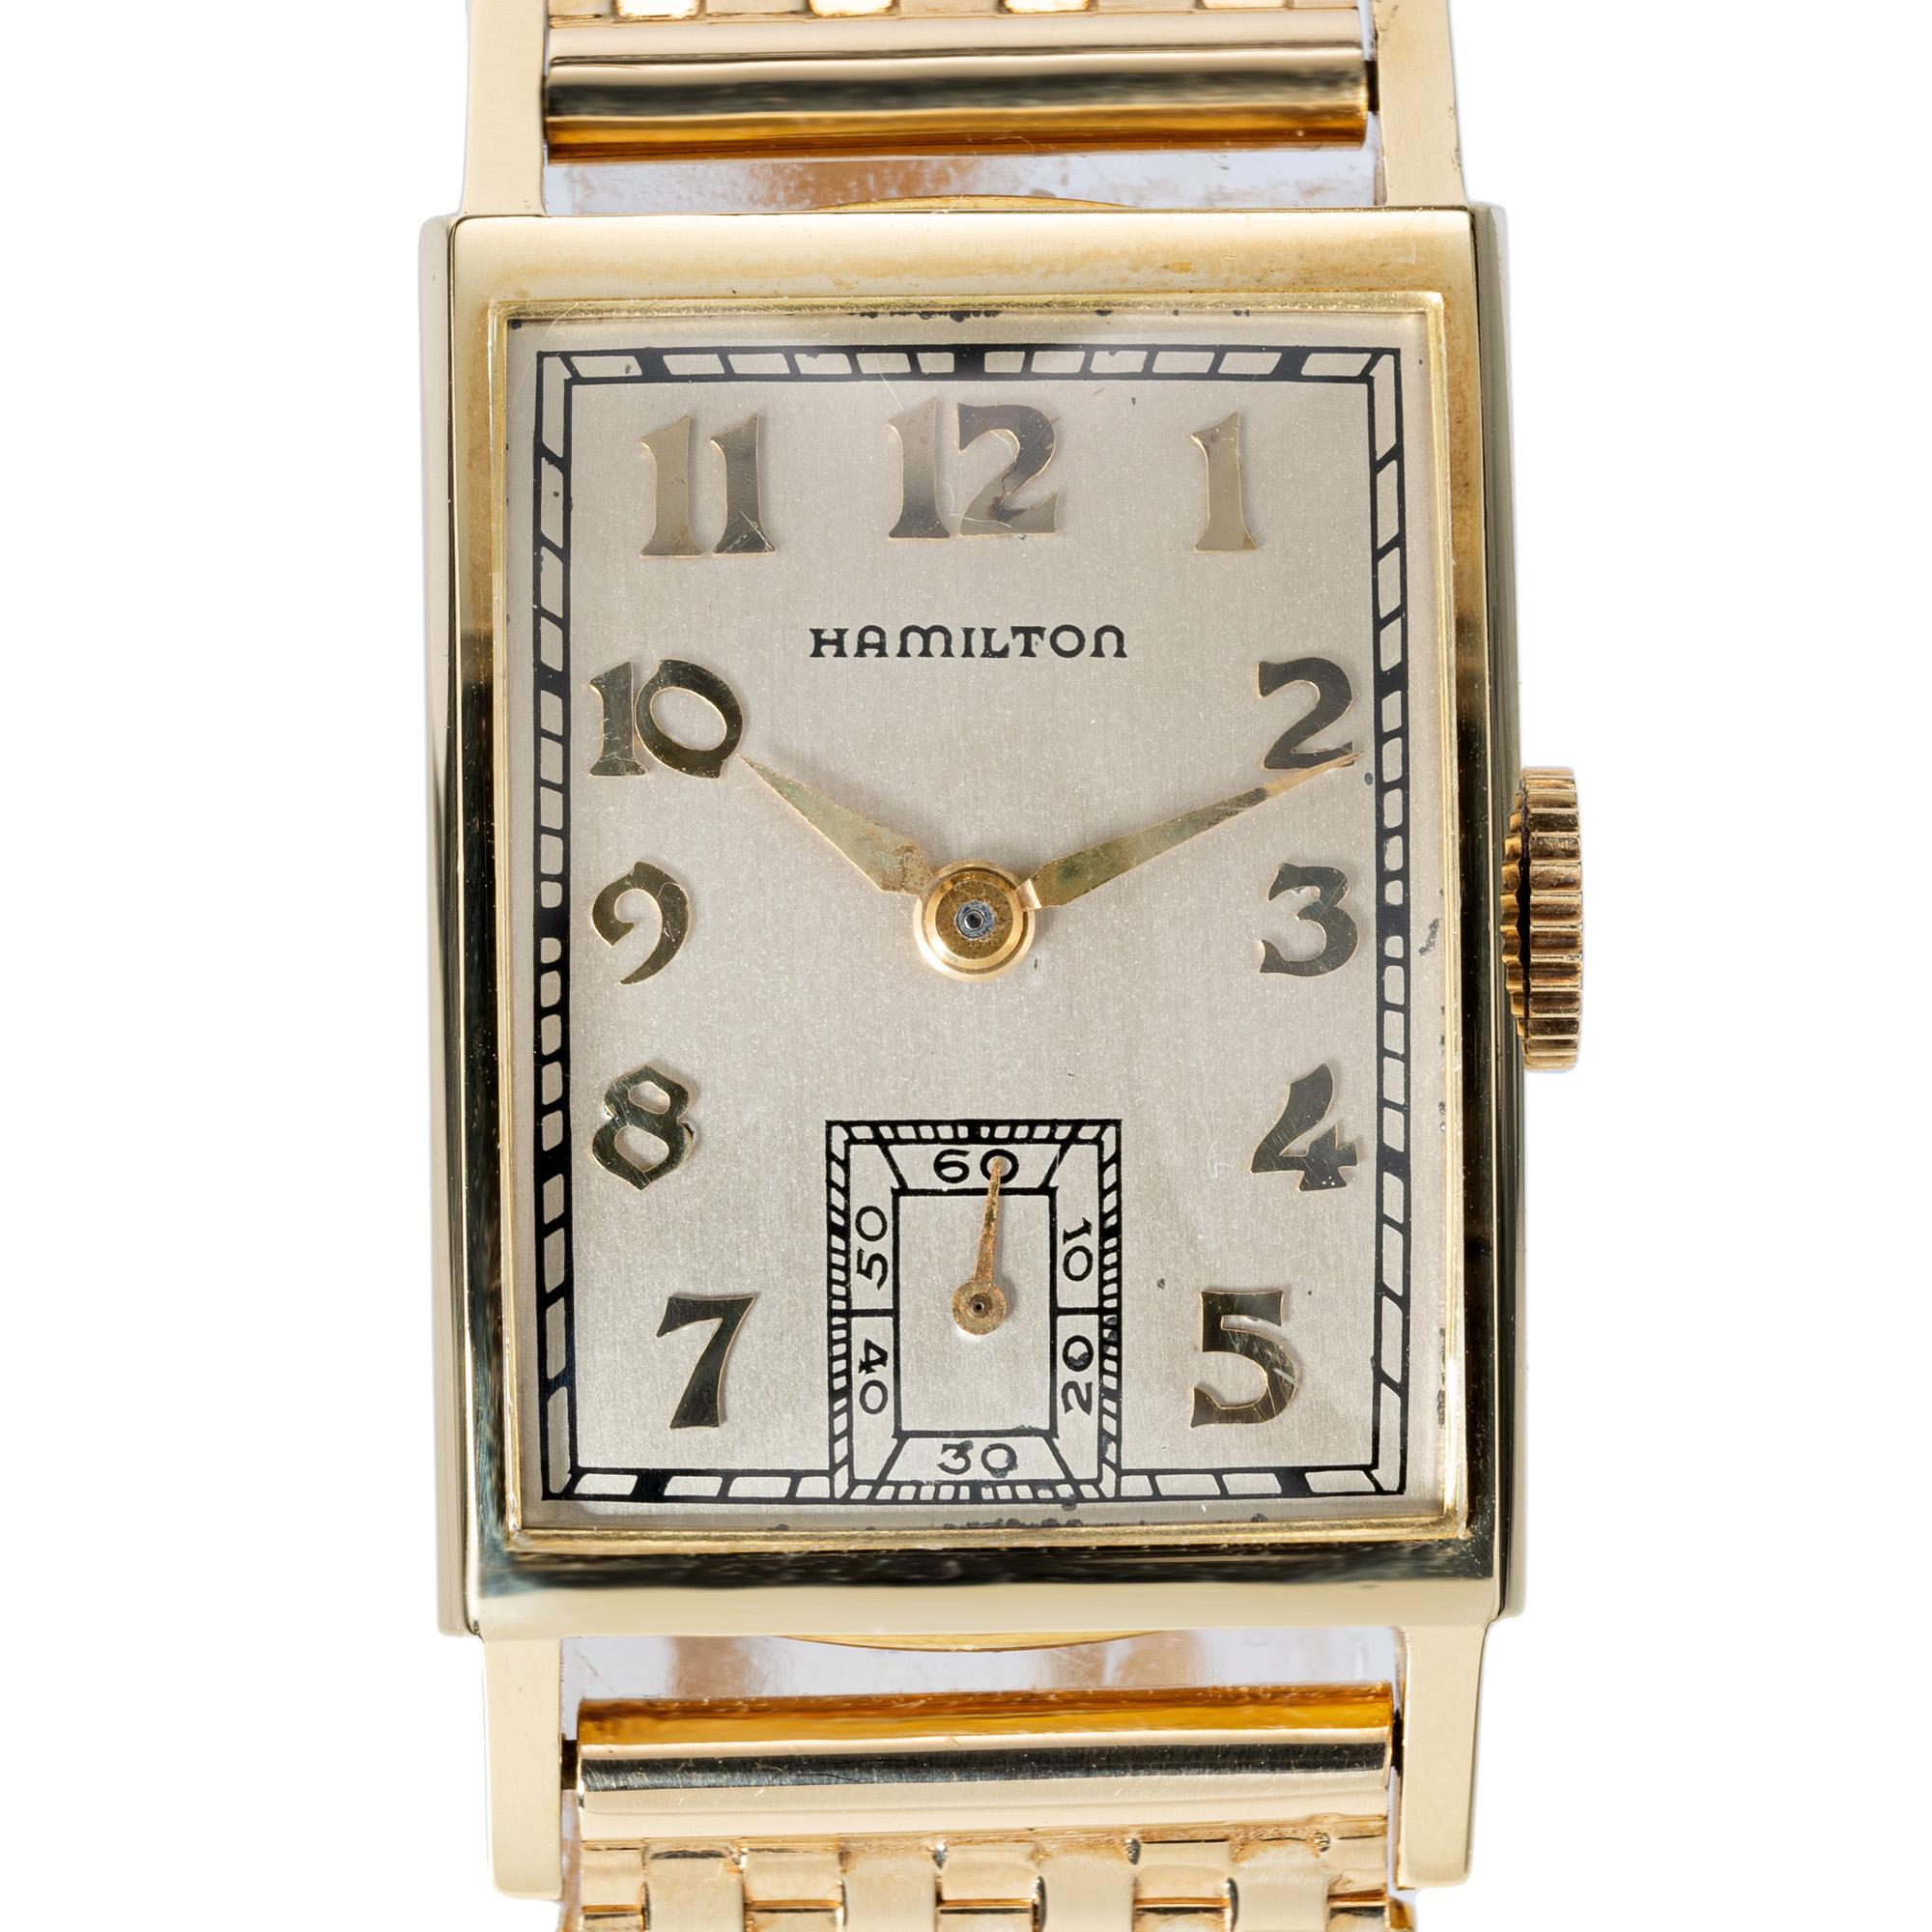 1950's Hamilton 14k yellow gold wristwatch. Rectangle dial with 9 row mesh 14k yellow gold band with a fold over safety buckle. Full one year service warranty. Band length is 6 3/8 inches

Length: 37.36mm
Width: 20.51mm
Band width at case: 16mm
Case